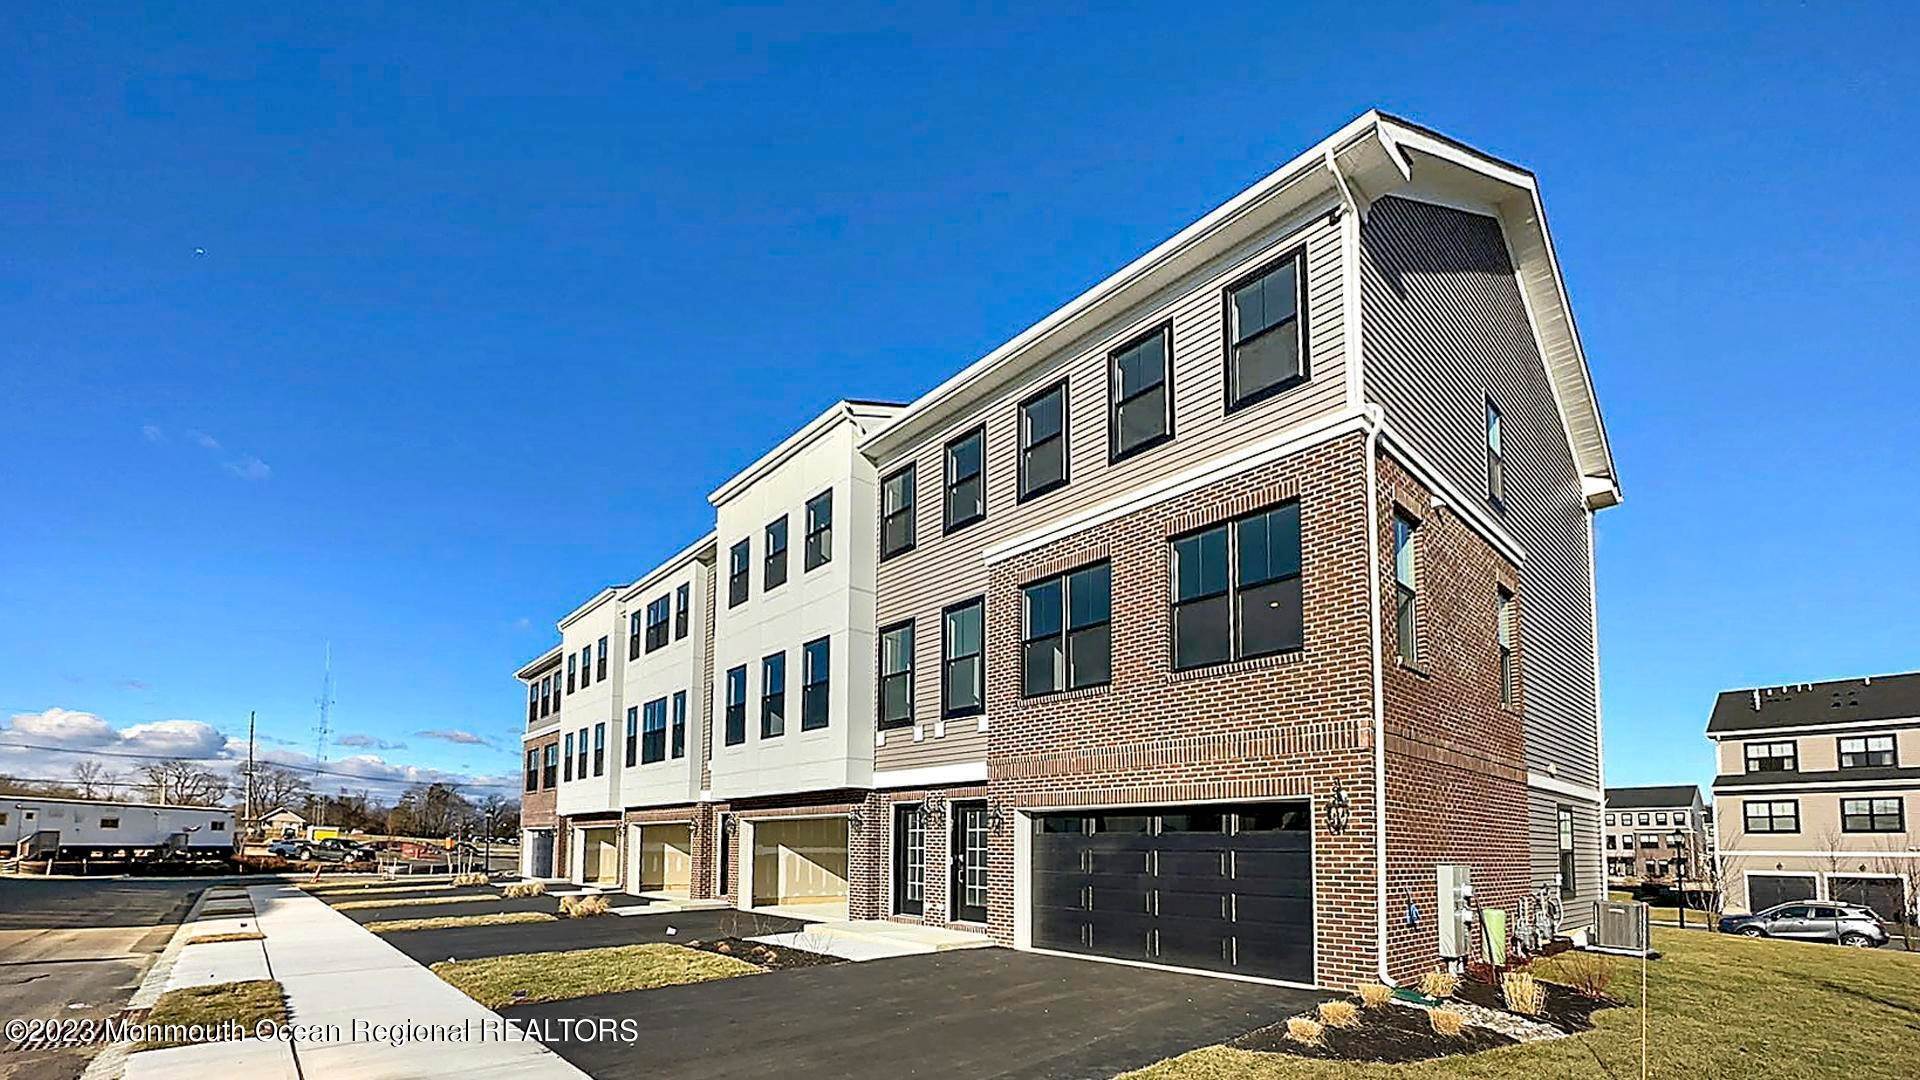 2. Residential Lease at 23 Kelly Way Tinton Falls, New Jersey 07724 United States